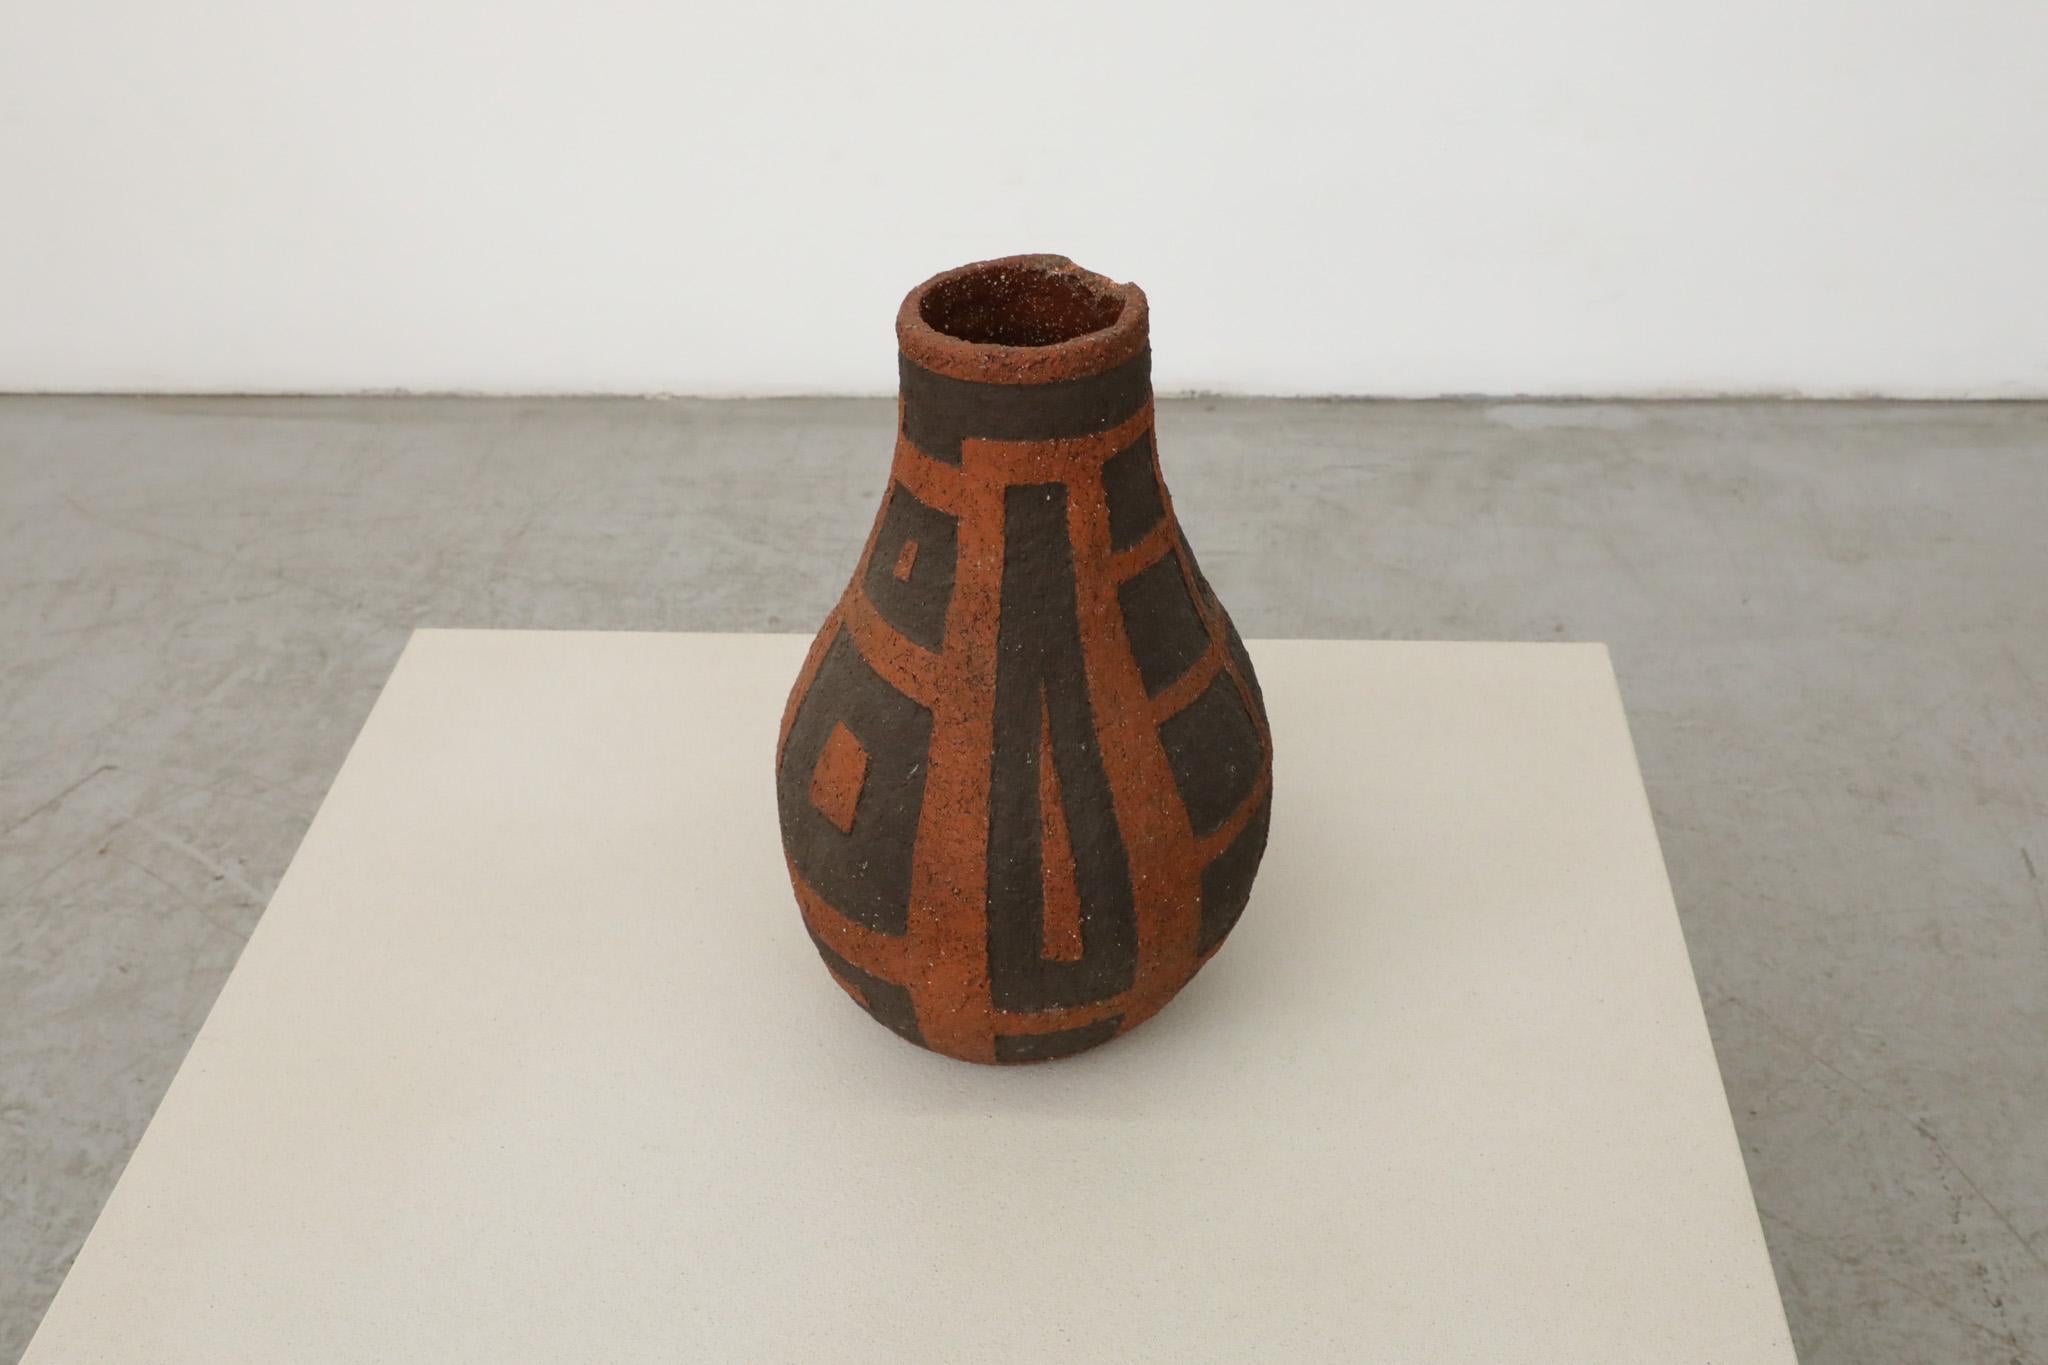 Large Red & Brown Ceramic Carstens Tönniehof Vase by Heukeroth & Siery In Good Condition For Sale In Los Angeles, CA